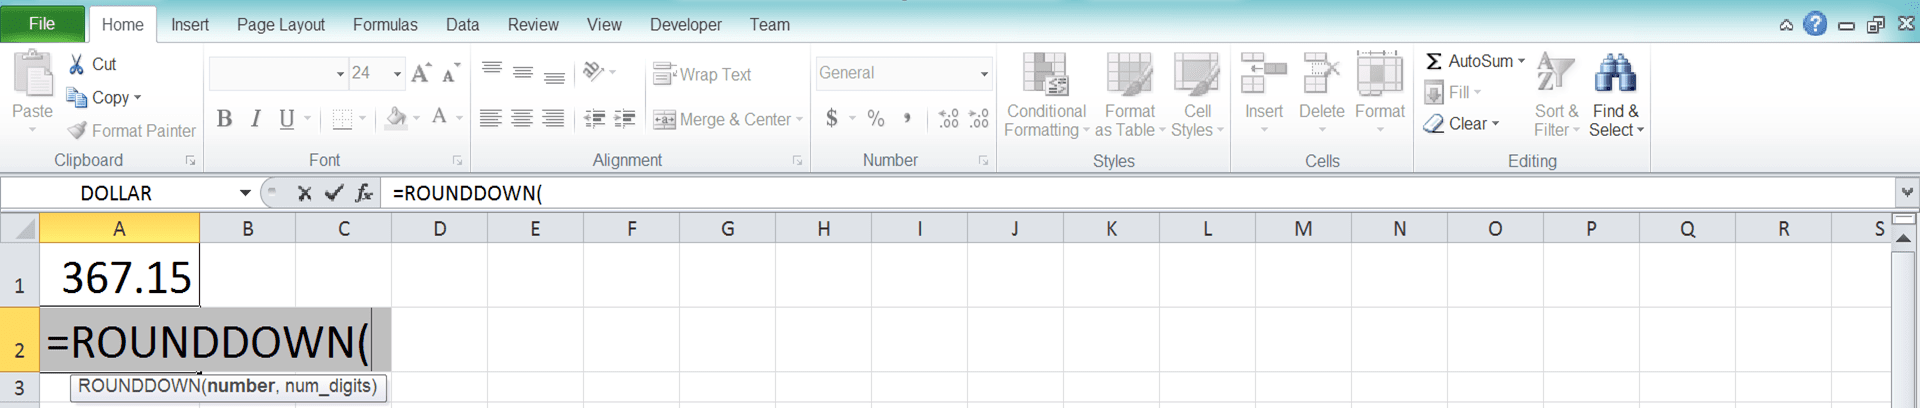 Excel ROUNDDOWN Formula: Functions, Examples, and How to Use - Screenshot of Step 2